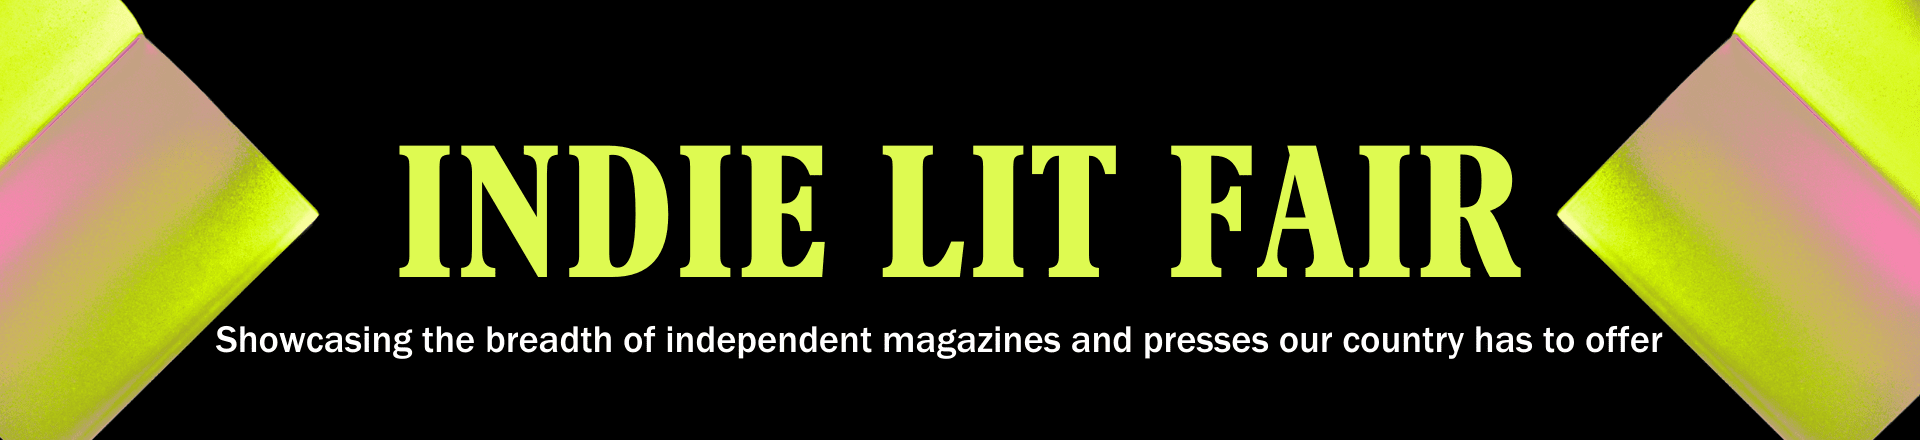 Indie Lit Fair: Showcasing the breadth of independent magazines and presses our country has to offer